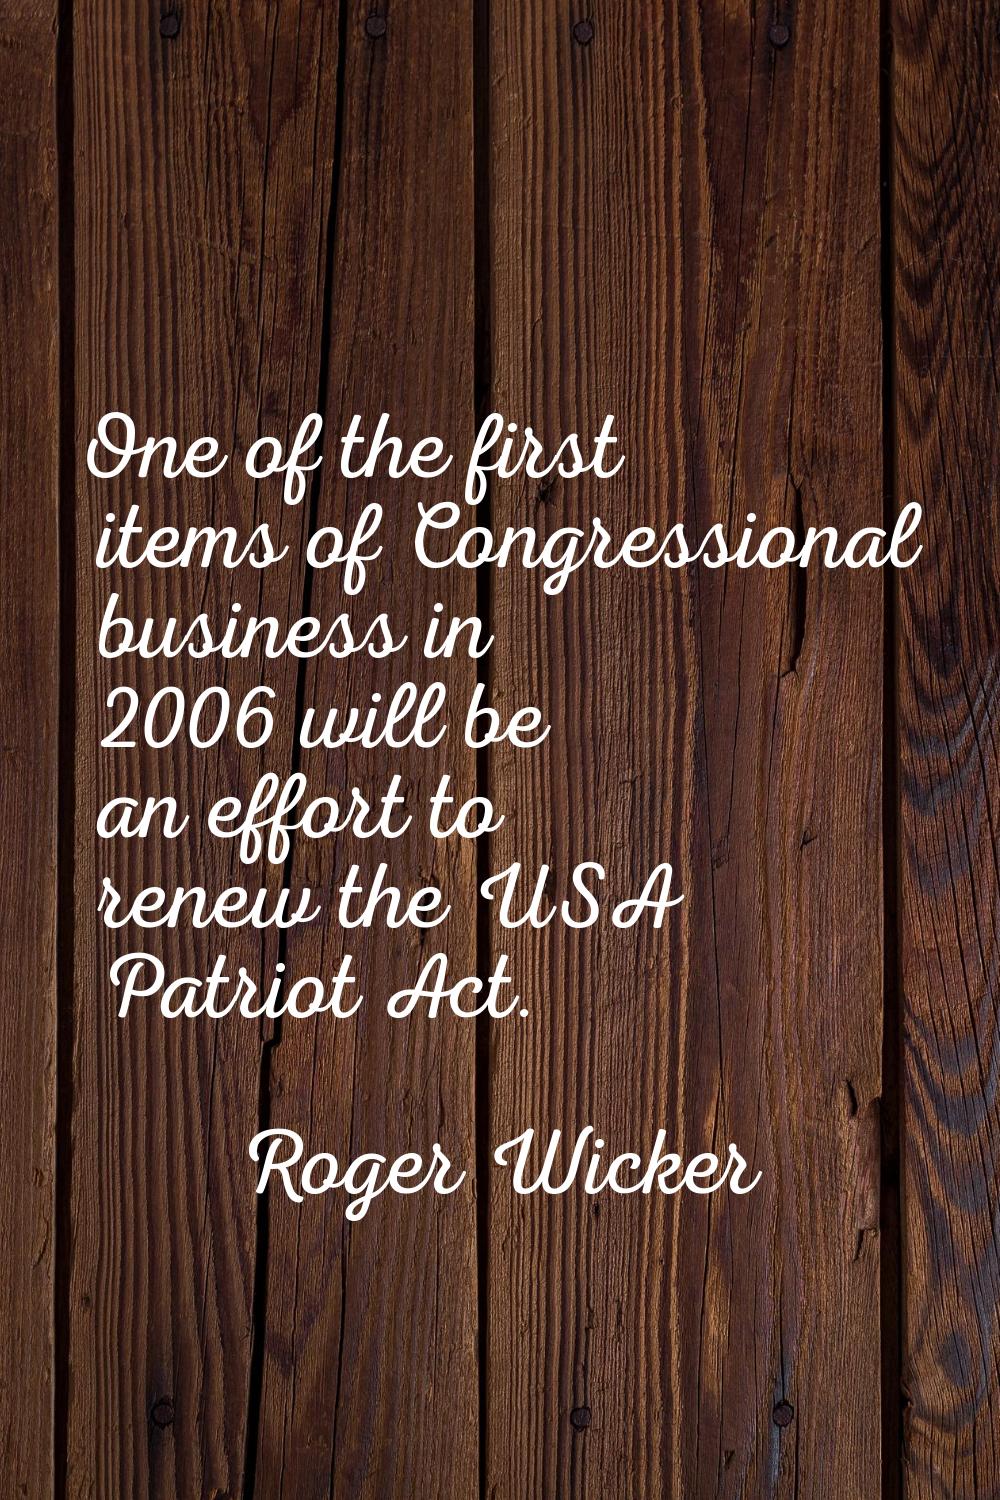 One of the first items of Congressional business in 2006 will be an effort to renew the USA Patriot